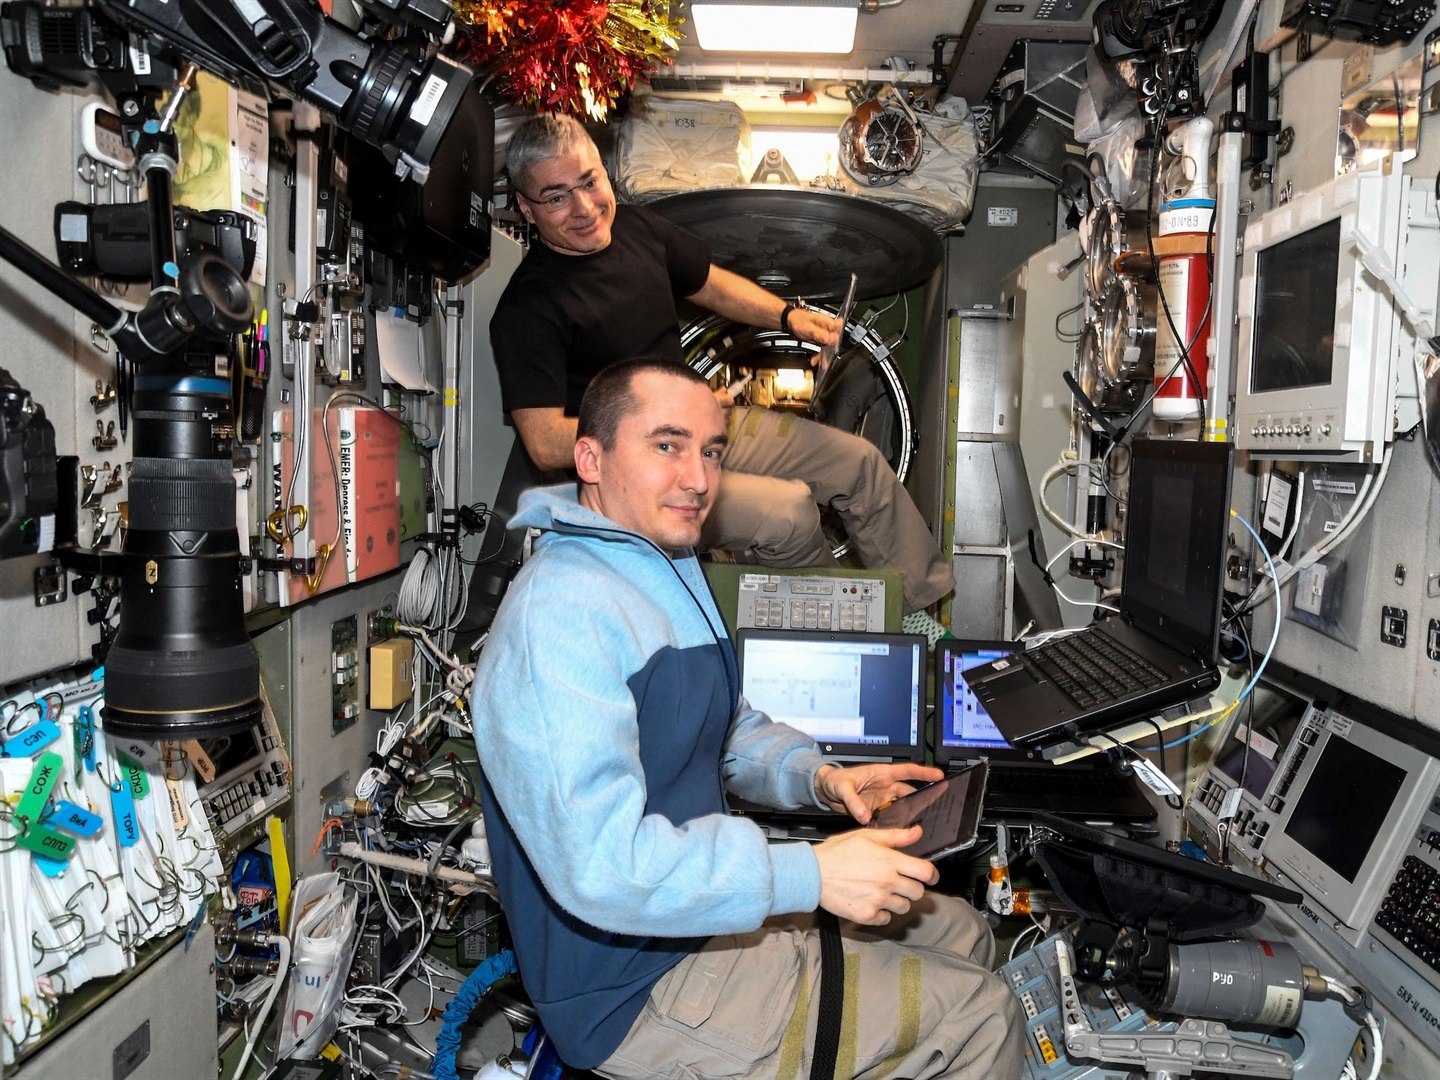 Mark Vande Hei (background) and Pyotr Dubrov train on a computer aboard the International Space Station, on December 28, 2021. Roscosmos/NASA